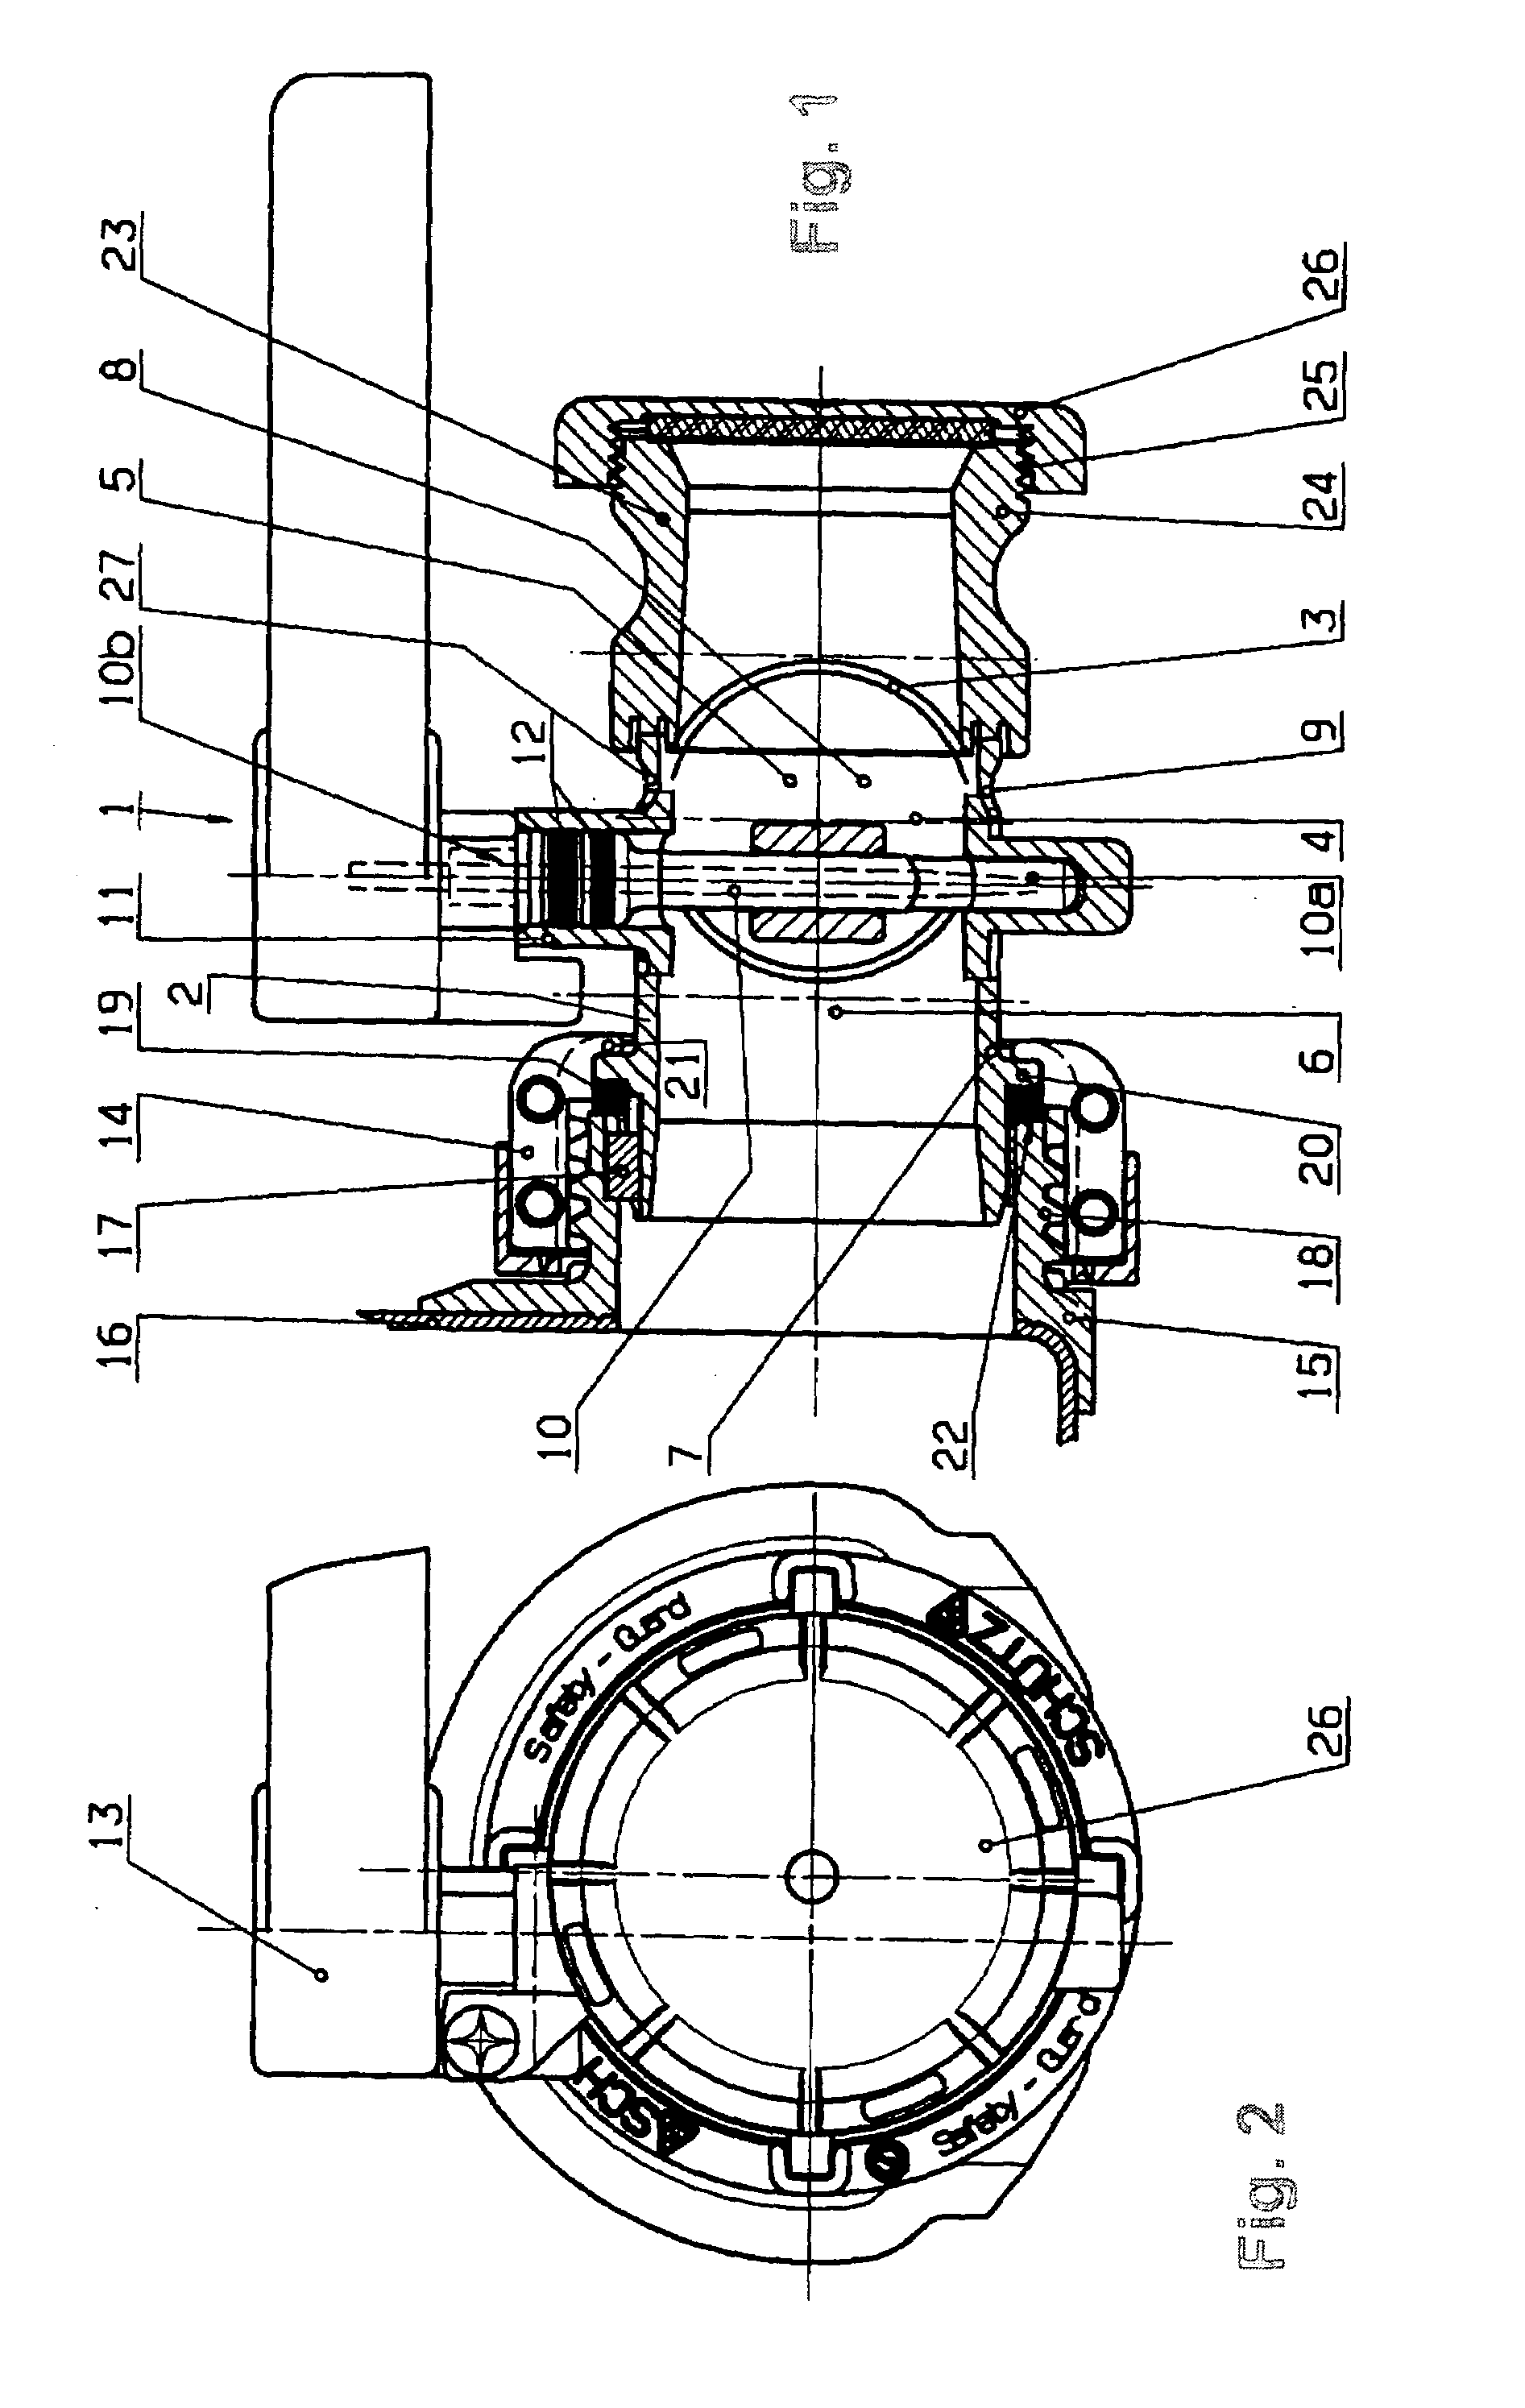 Tapping valve of plastics material for transport and storage containers for liquids